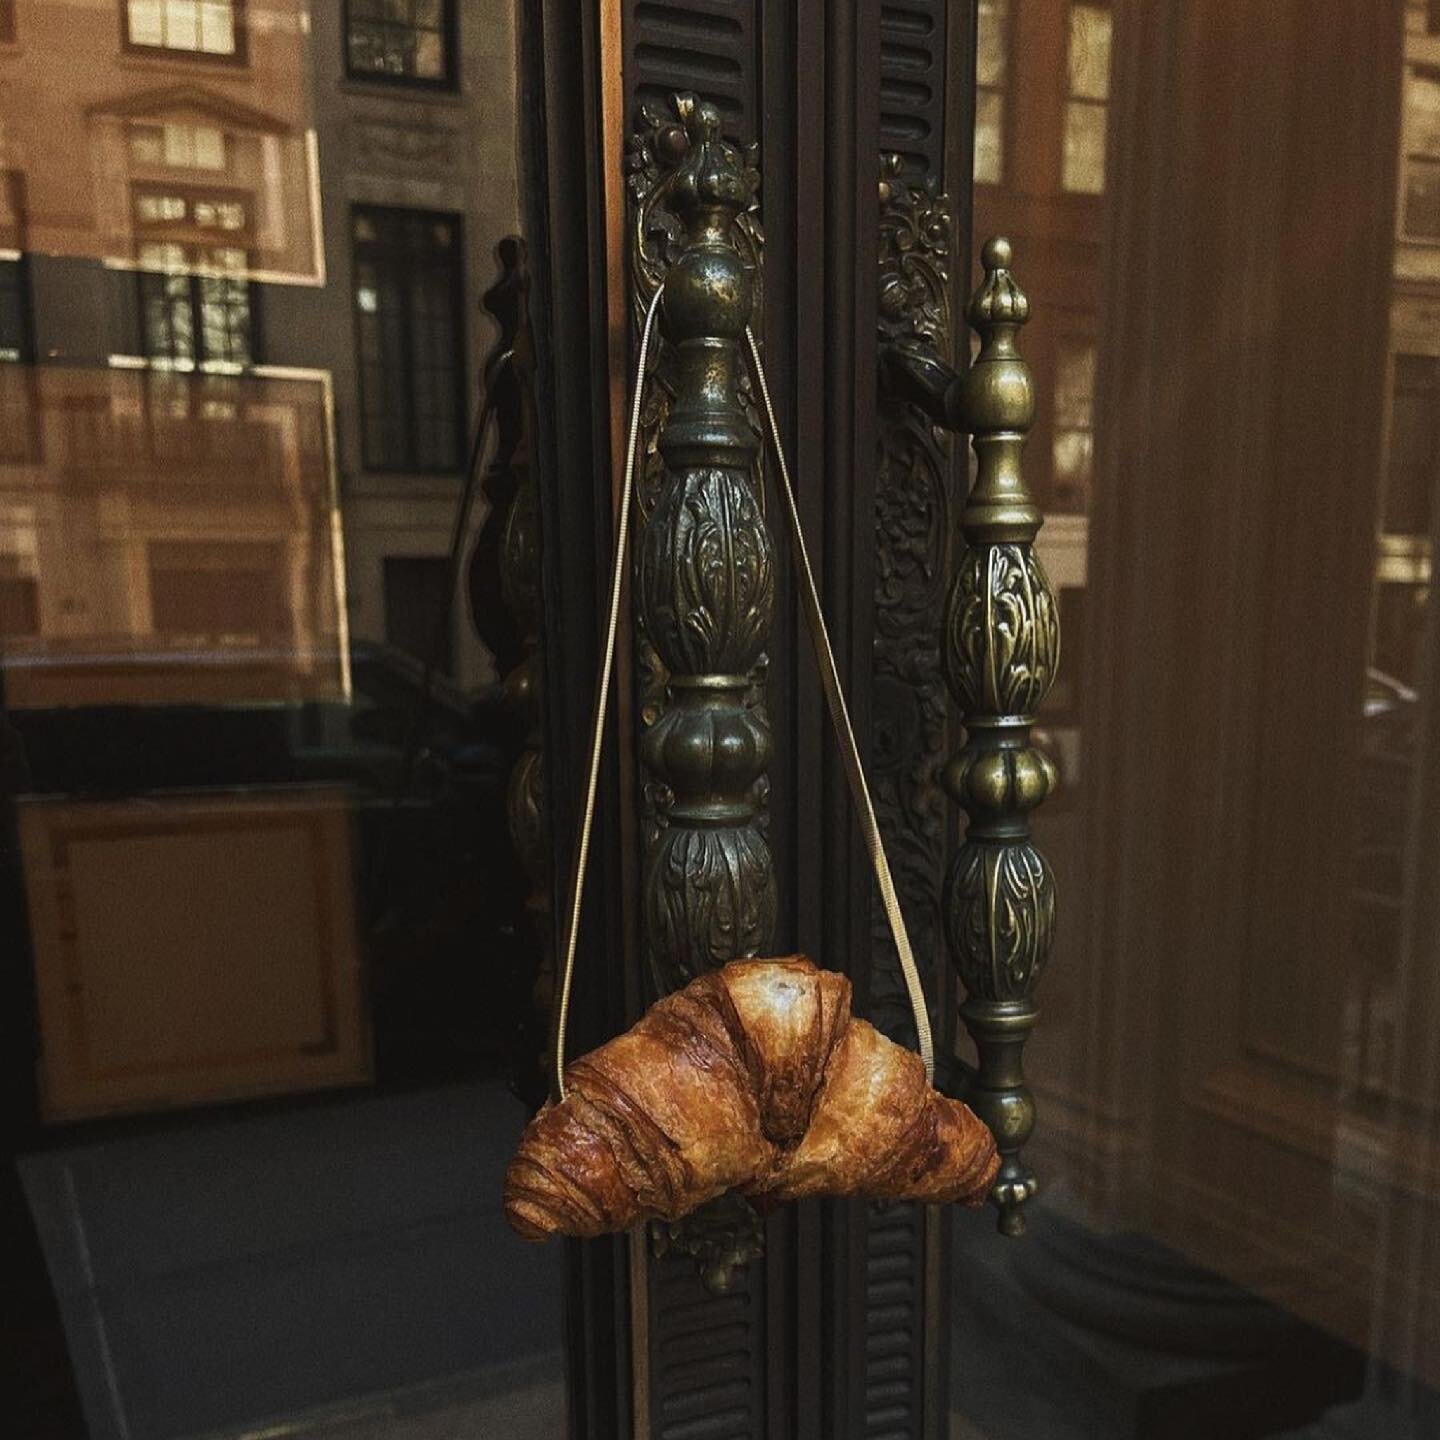 Breakfast at The Attic 🥐 What&rsquo;s your favorite petit dej pastry?
📸 @thepouf 
.
.
.
#repost #morning #morningvibes #morningwalk #morningroutine #breakfast #breakfastideas #breakfasttime #mood #moodoftheday #moodboard #moodygrams #croissant